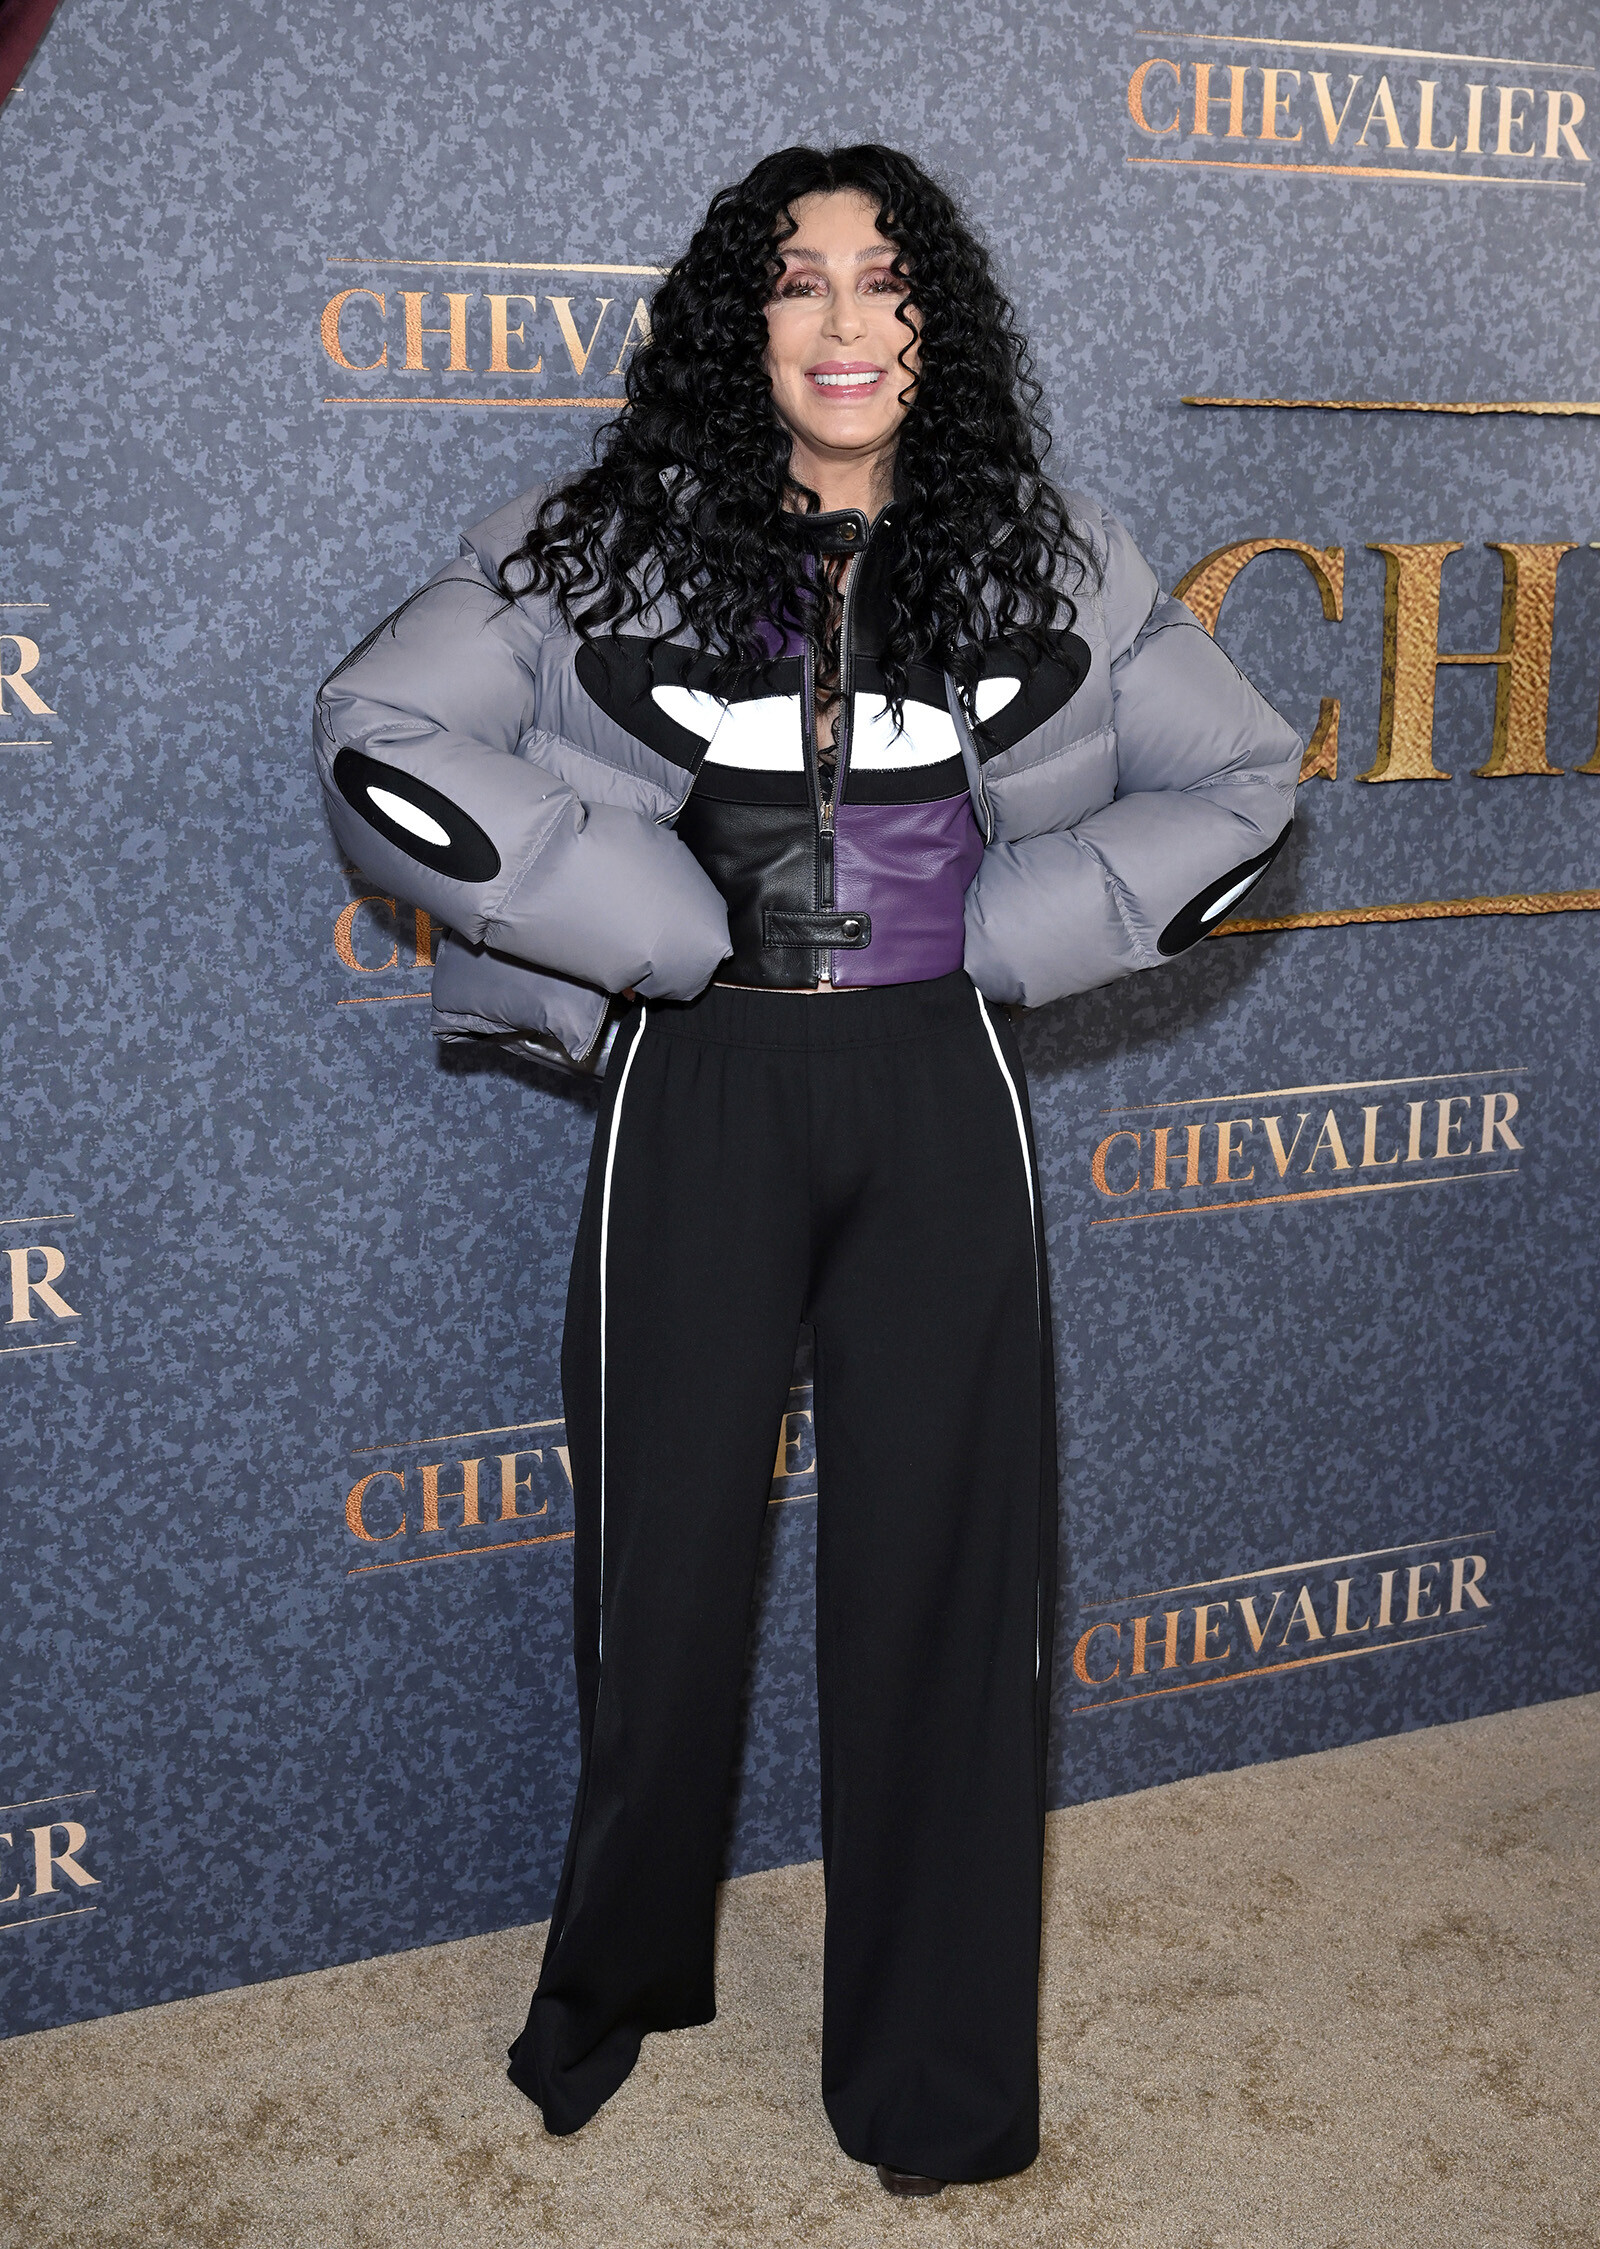 Cher-to-become-70-again-03-Mainstyle.jpg